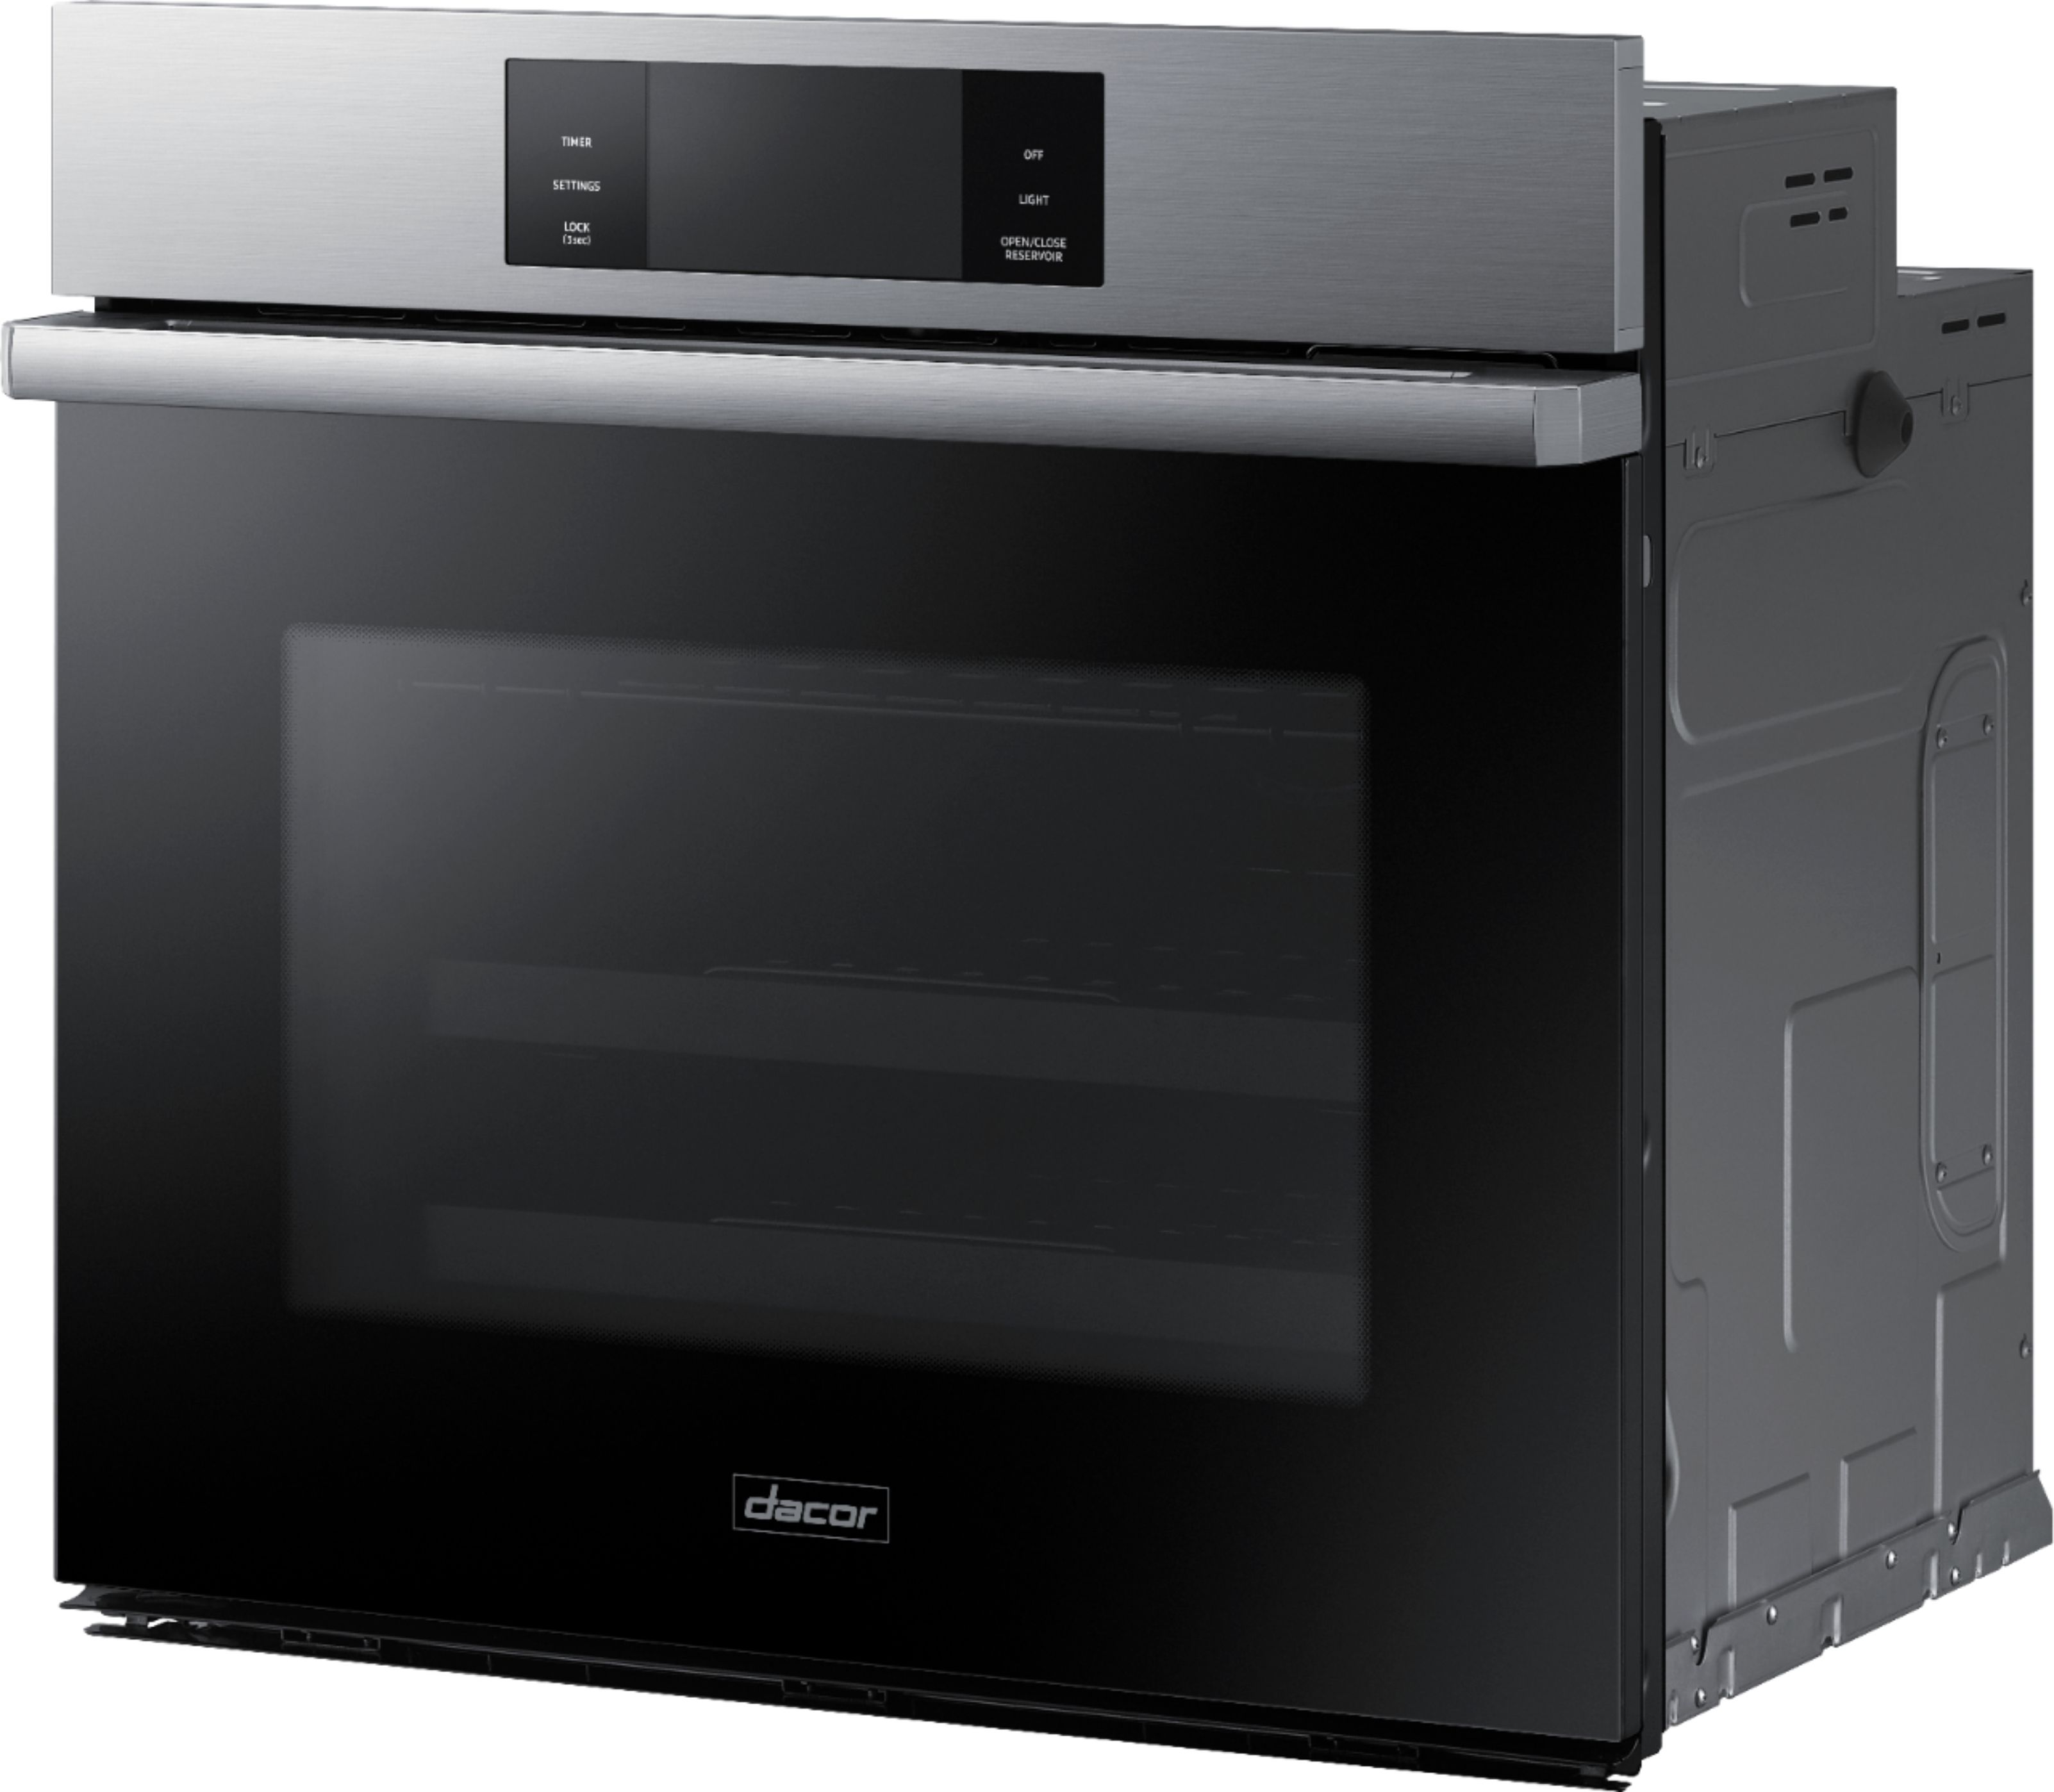 Angle View: Bertazzoni - Design Series 30" Built-In Double Electric Convection Wall Oven - Black